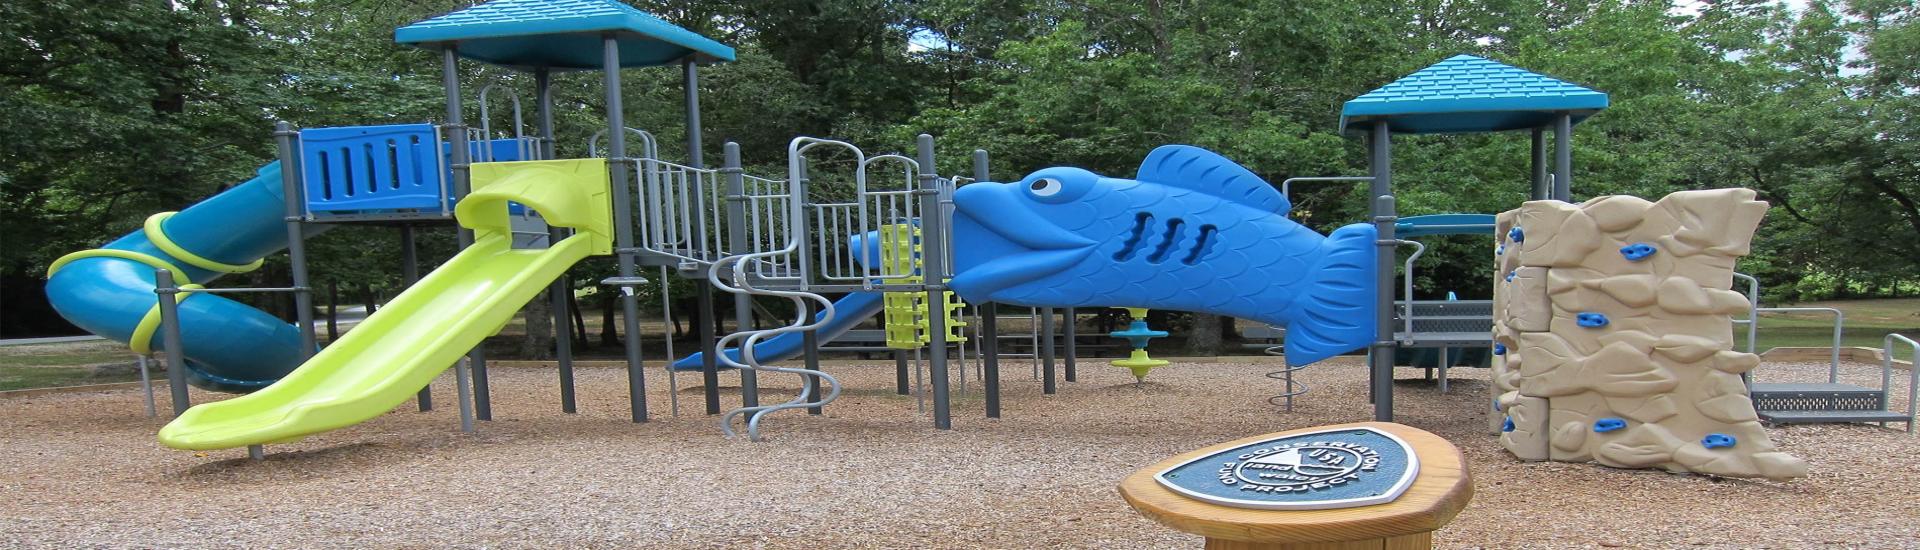 Land and water conservation fun grant playground